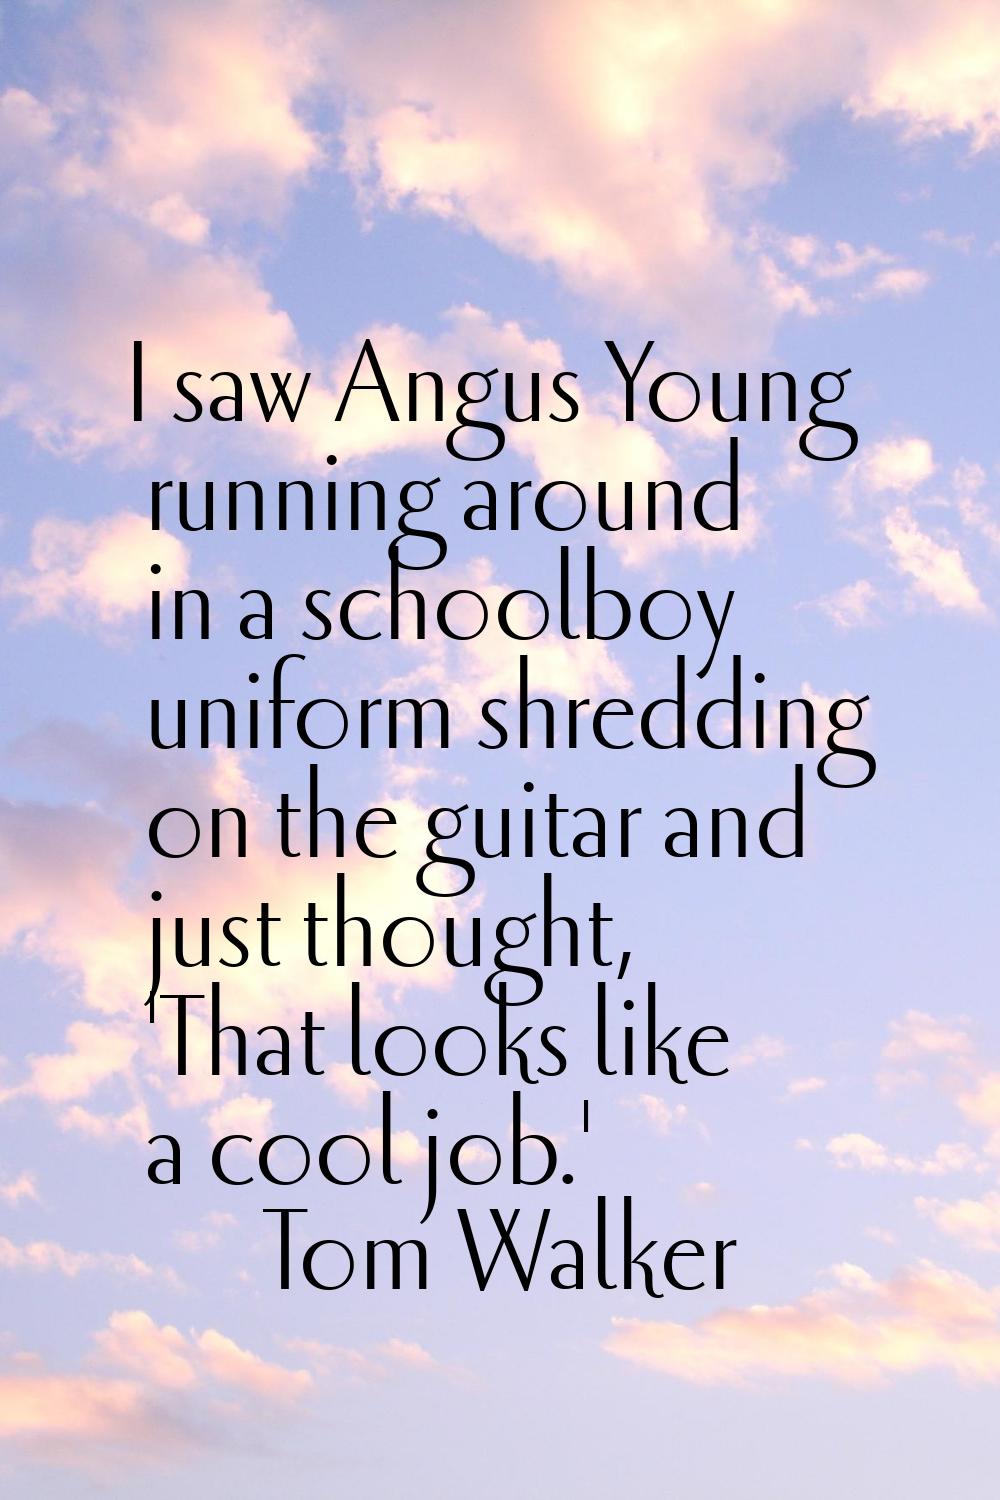 I saw Angus Young running around in a schoolboy uniform shredding on the guitar and just thought, '